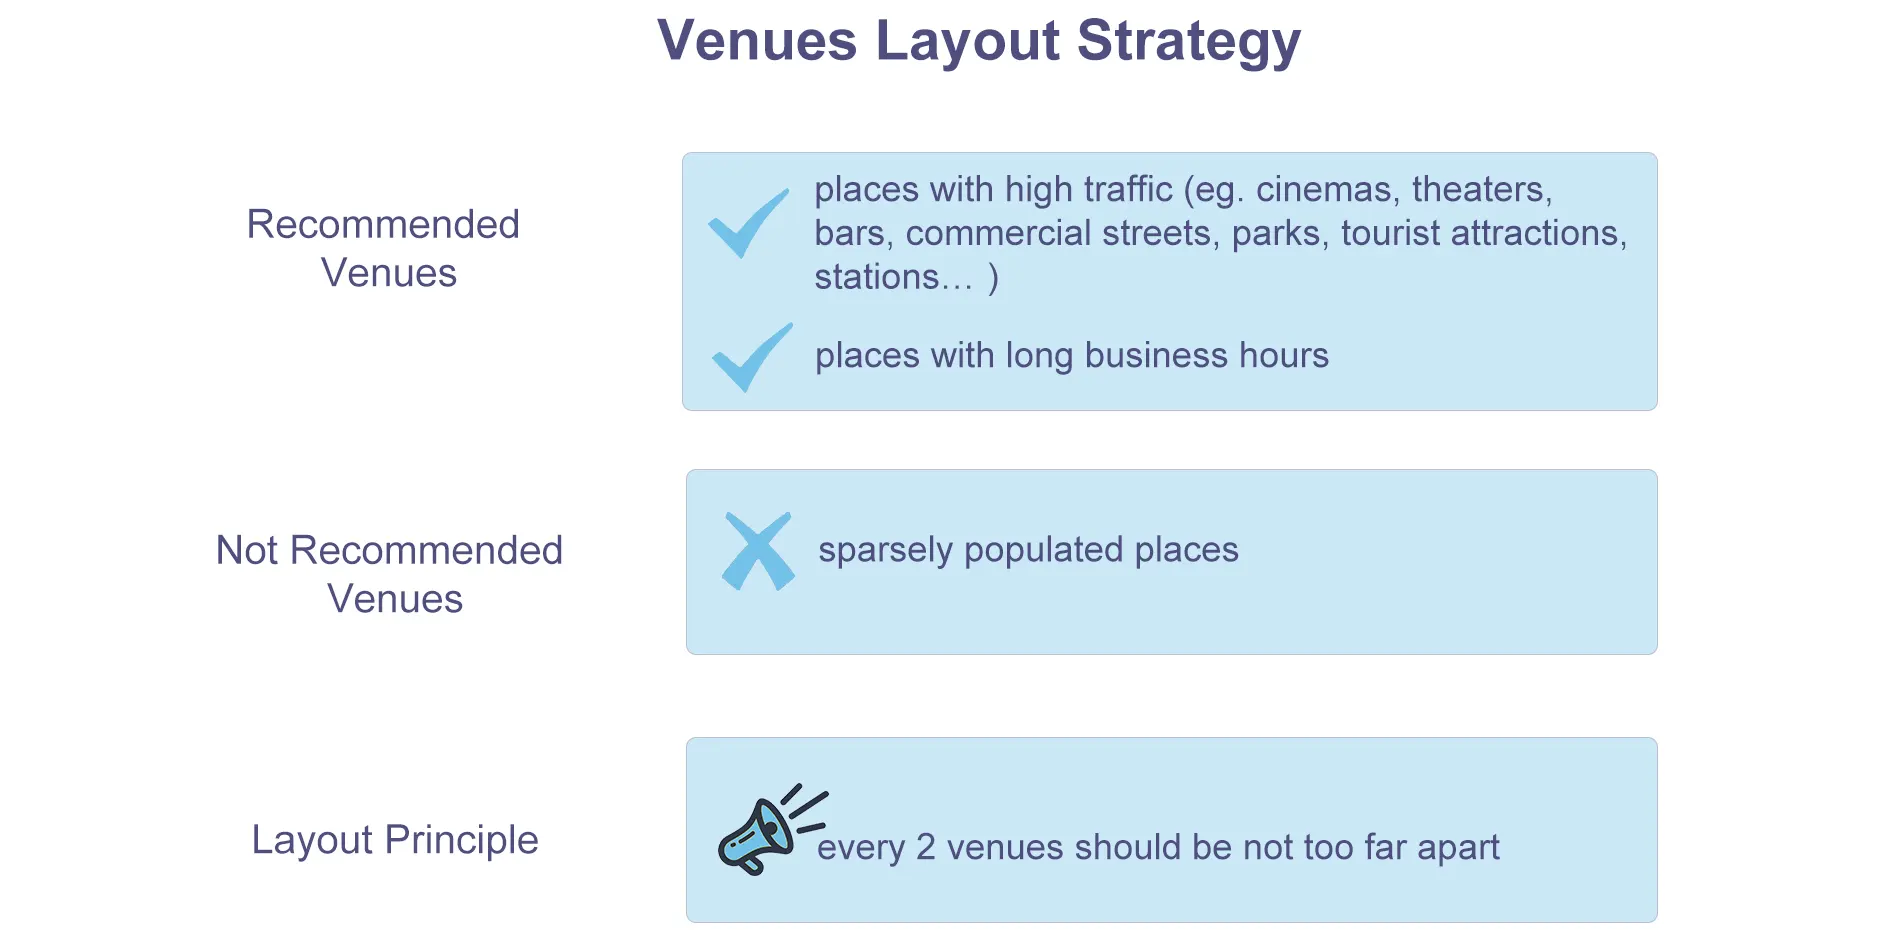 shared power bank business venues layout strategy